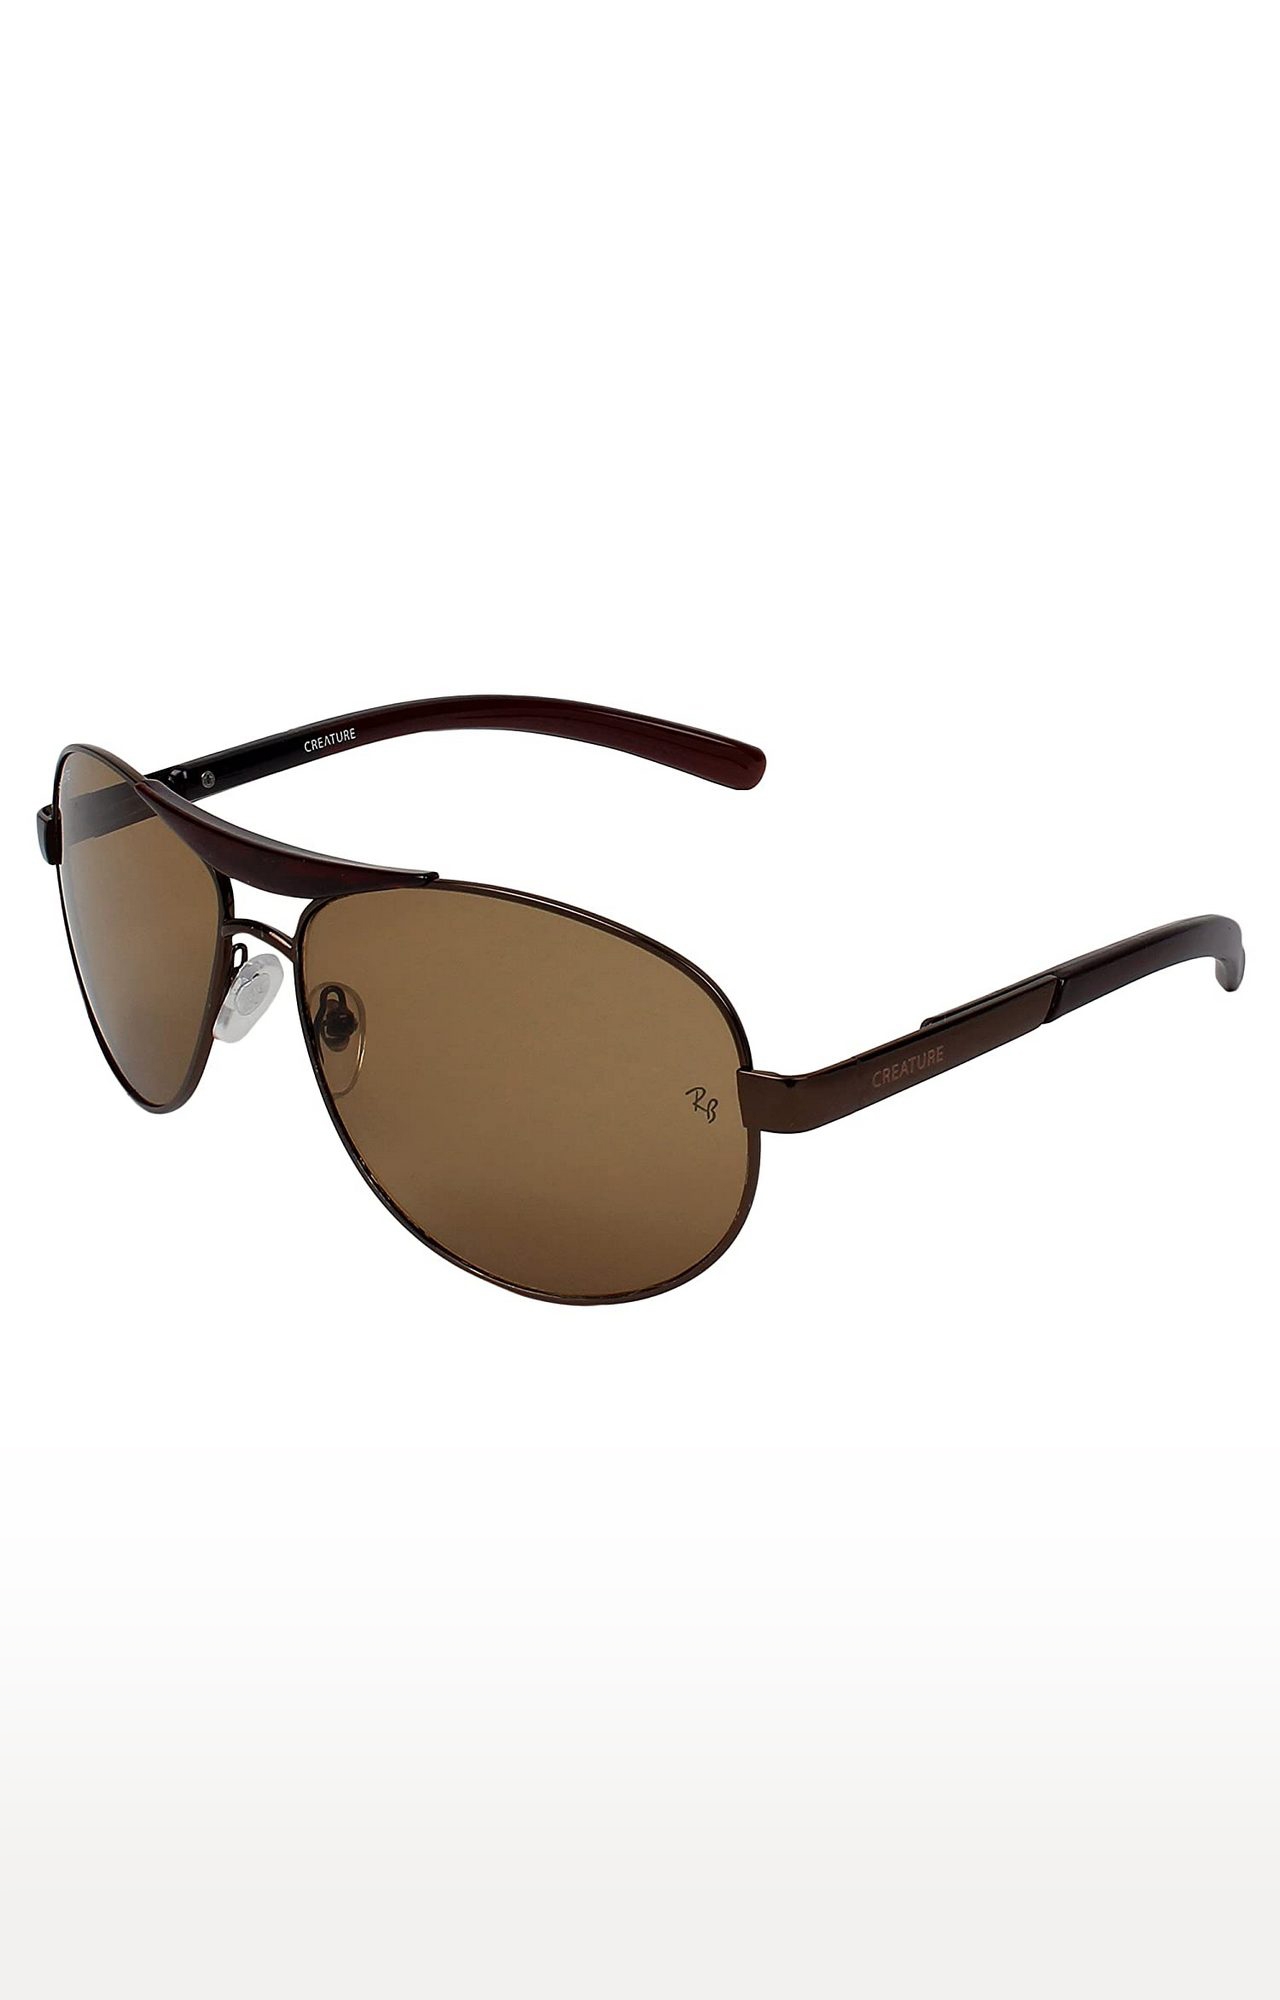 CREATURE | CREATURE Green & Brown Aviator Sunglasses Combo with UV Protection (Lens-Green & Brown|Frame-Black & Brown) 4